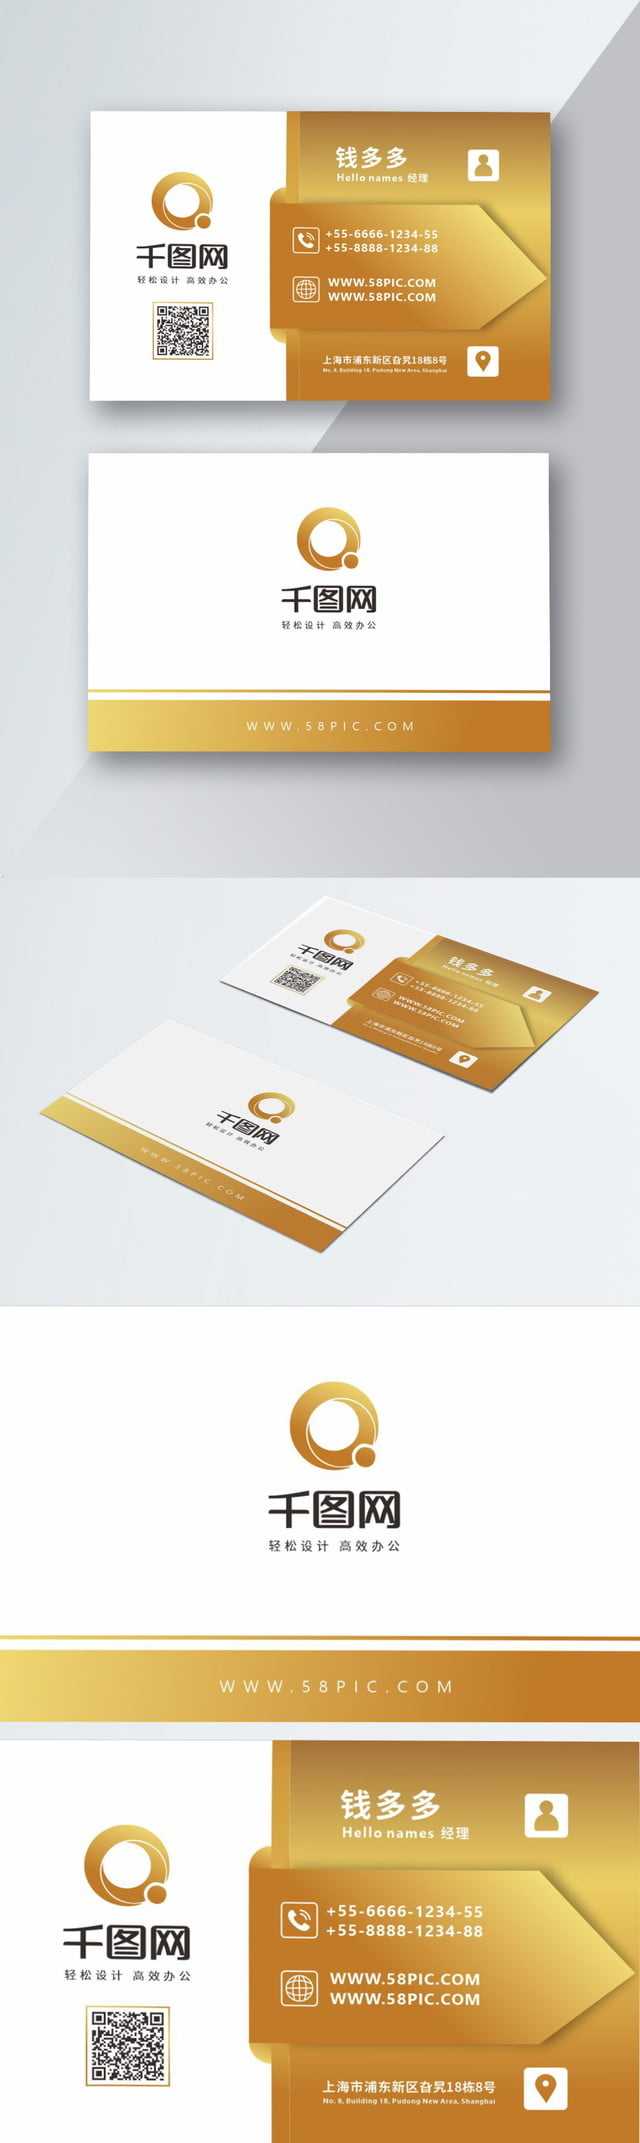 Hotel Business Card Vector Material Hotel Business Card Regarding Download Visiting Card Templates